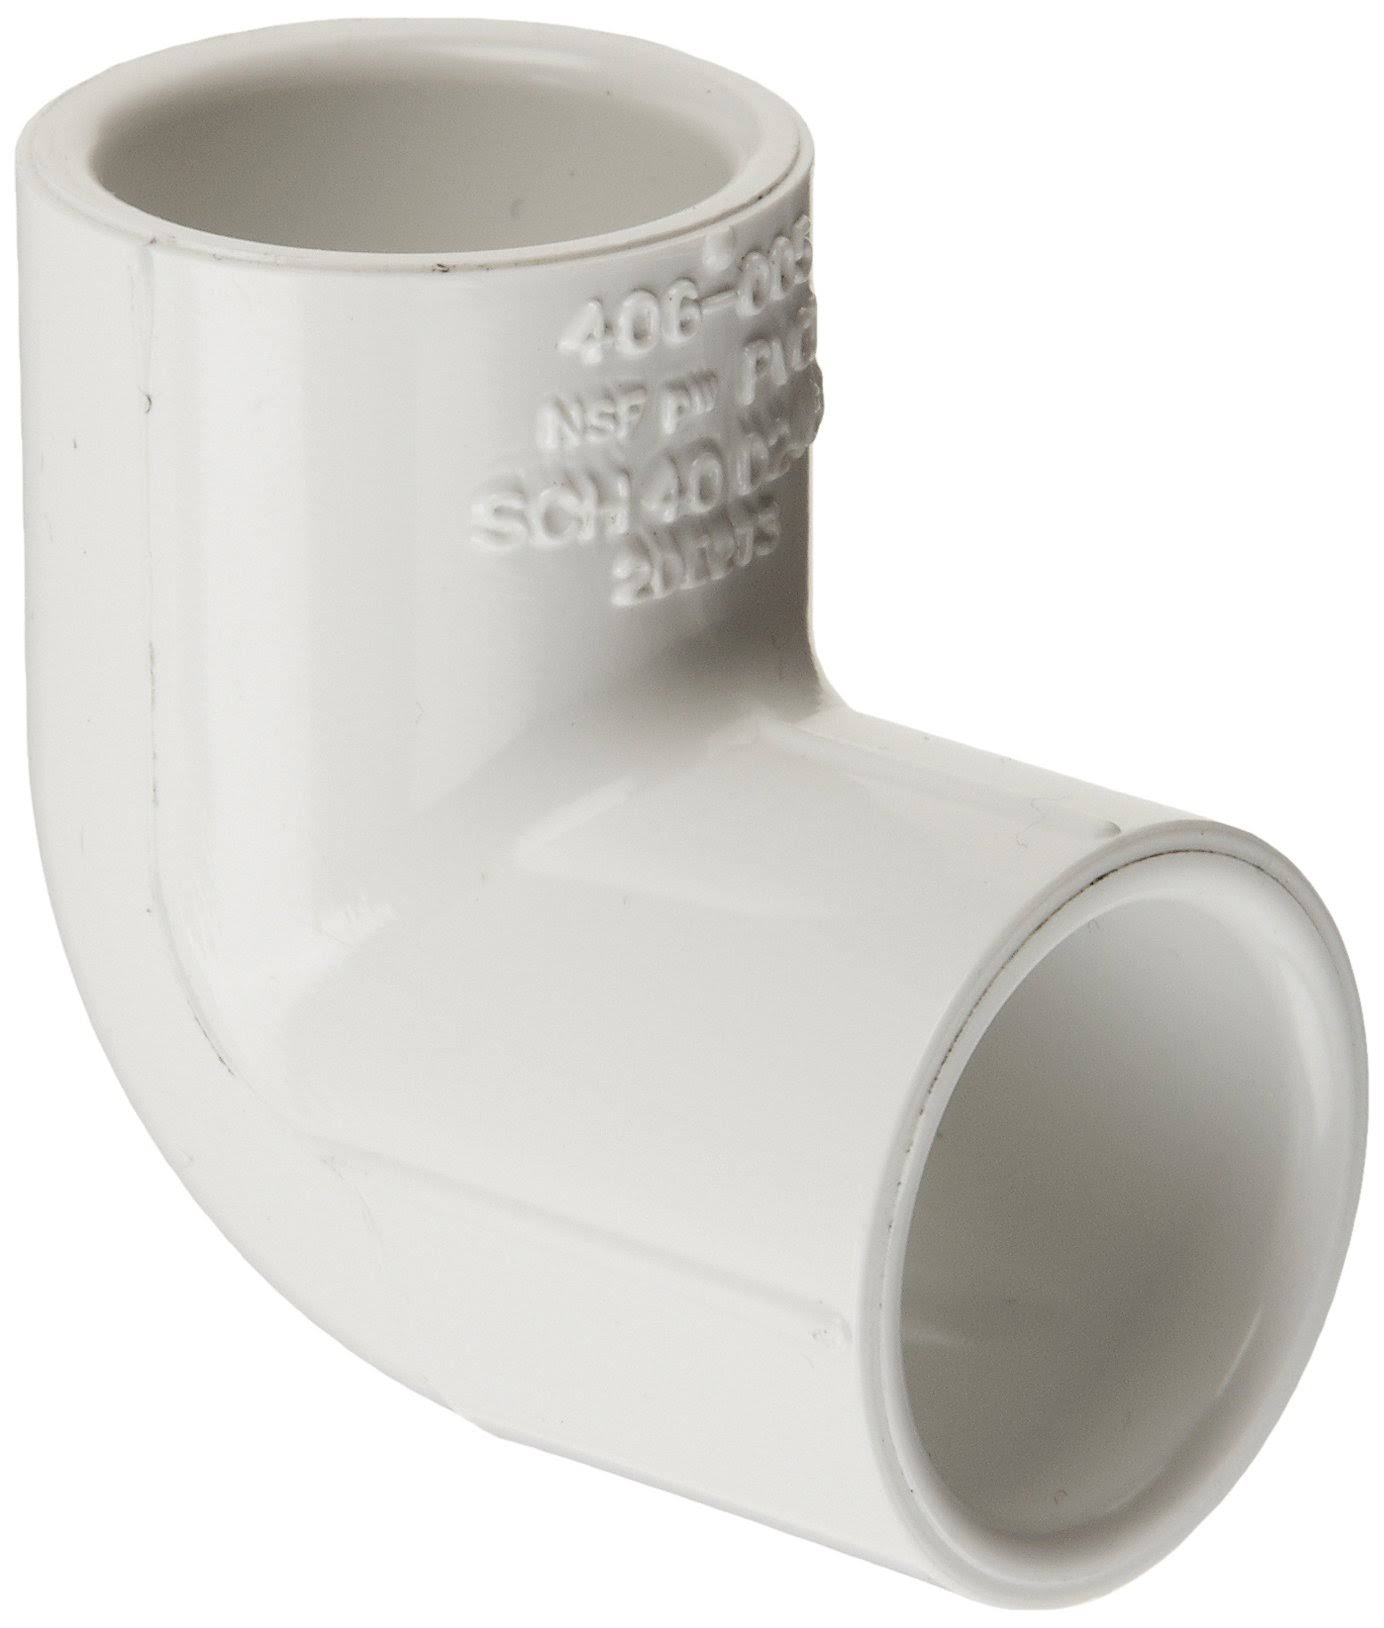 Spears 4 PVC Pipe Fitting - 4"